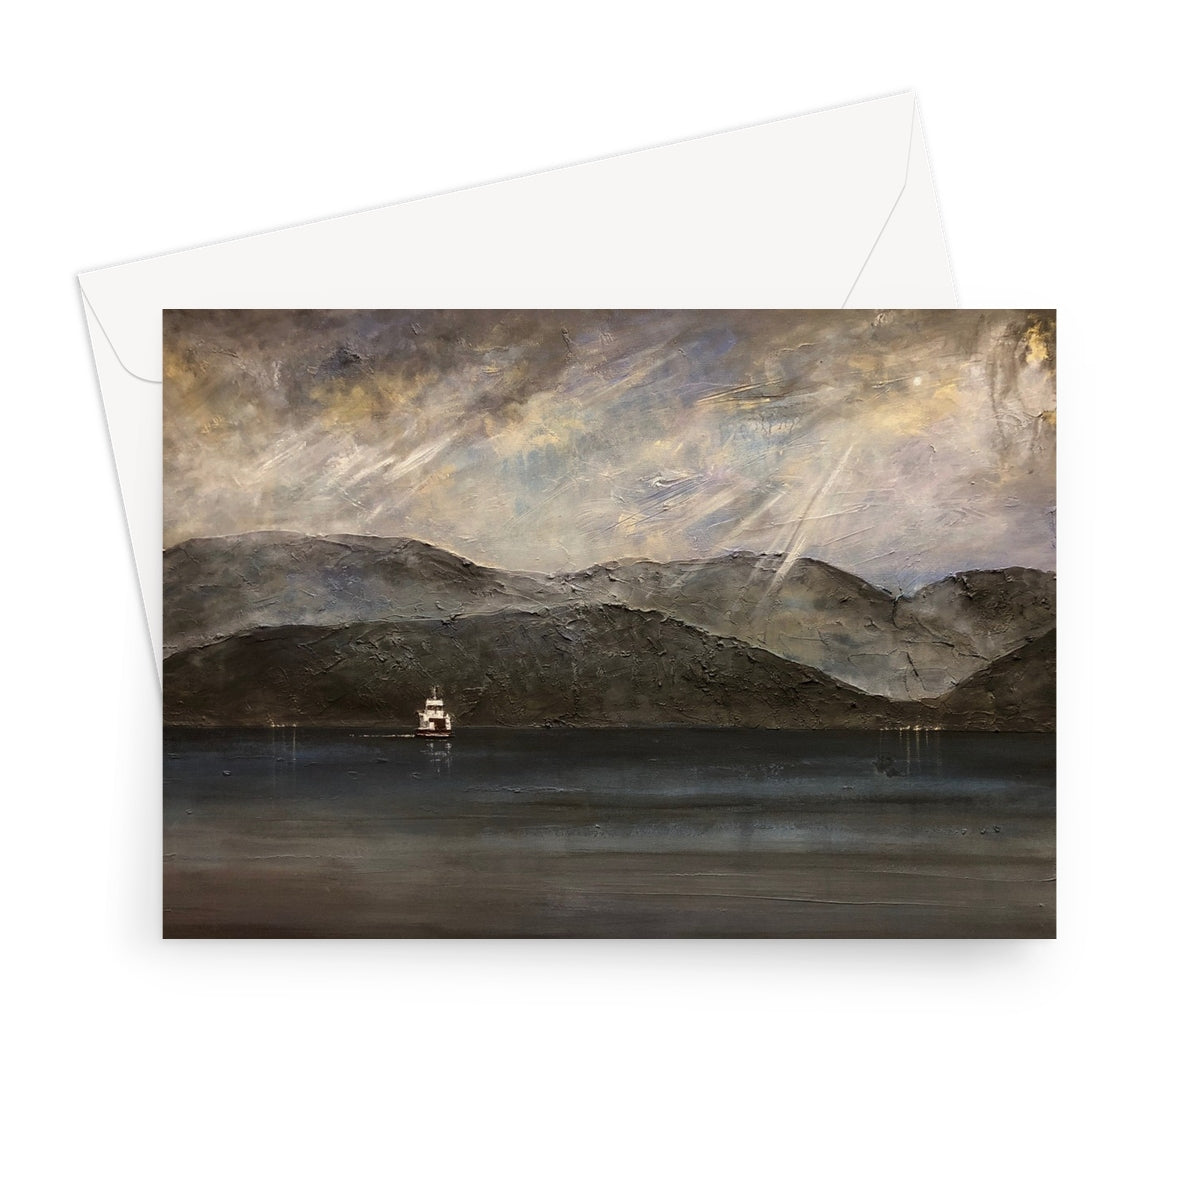 Lochranza Moonlit Ferry Arran Art Gifts Greeting Card-Greetings Cards-Arran Art Gallery-7"x5"-1 Card-Paintings, Prints, Homeware, Art Gifts From Scotland By Scottish Artist Kevin Hunter